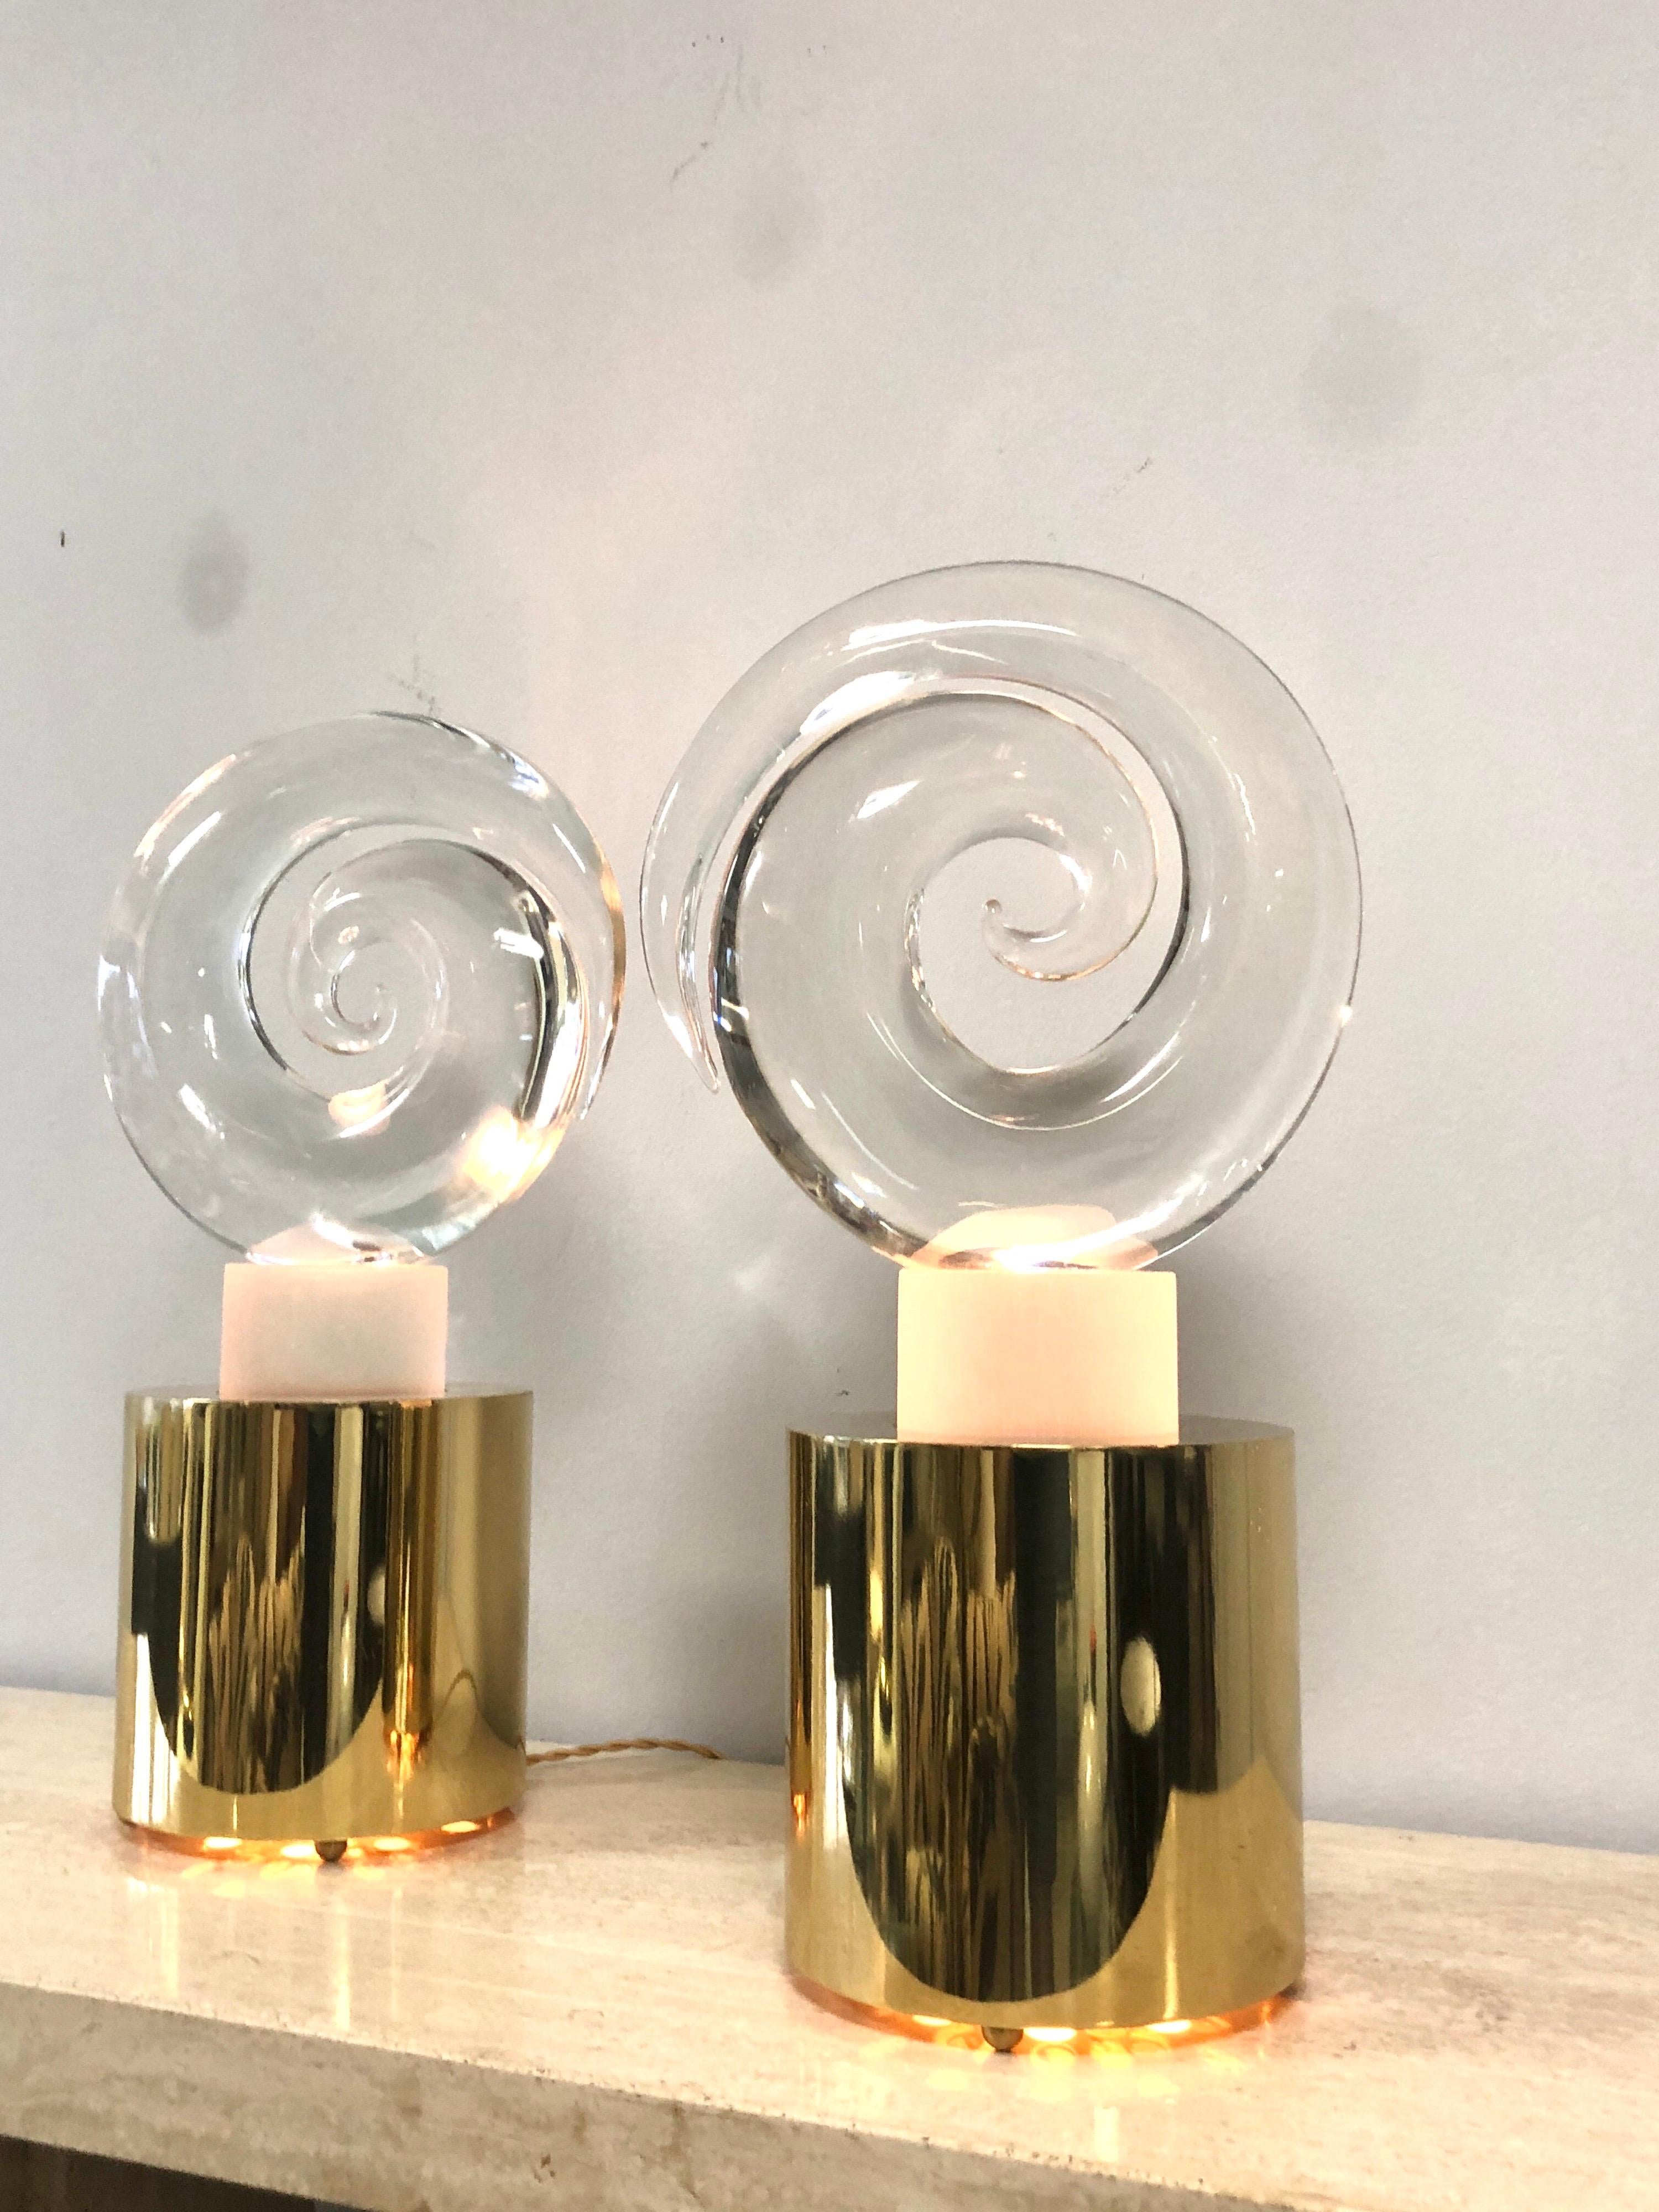 A rare pair of large sculptural lamps by extraordinary glass artist Livio Seguso. The solid art glass pieces rest on custom lighted metal bases. Quite unique. The glass is clear, there are removable pink and blue filters included. Both glass pieces